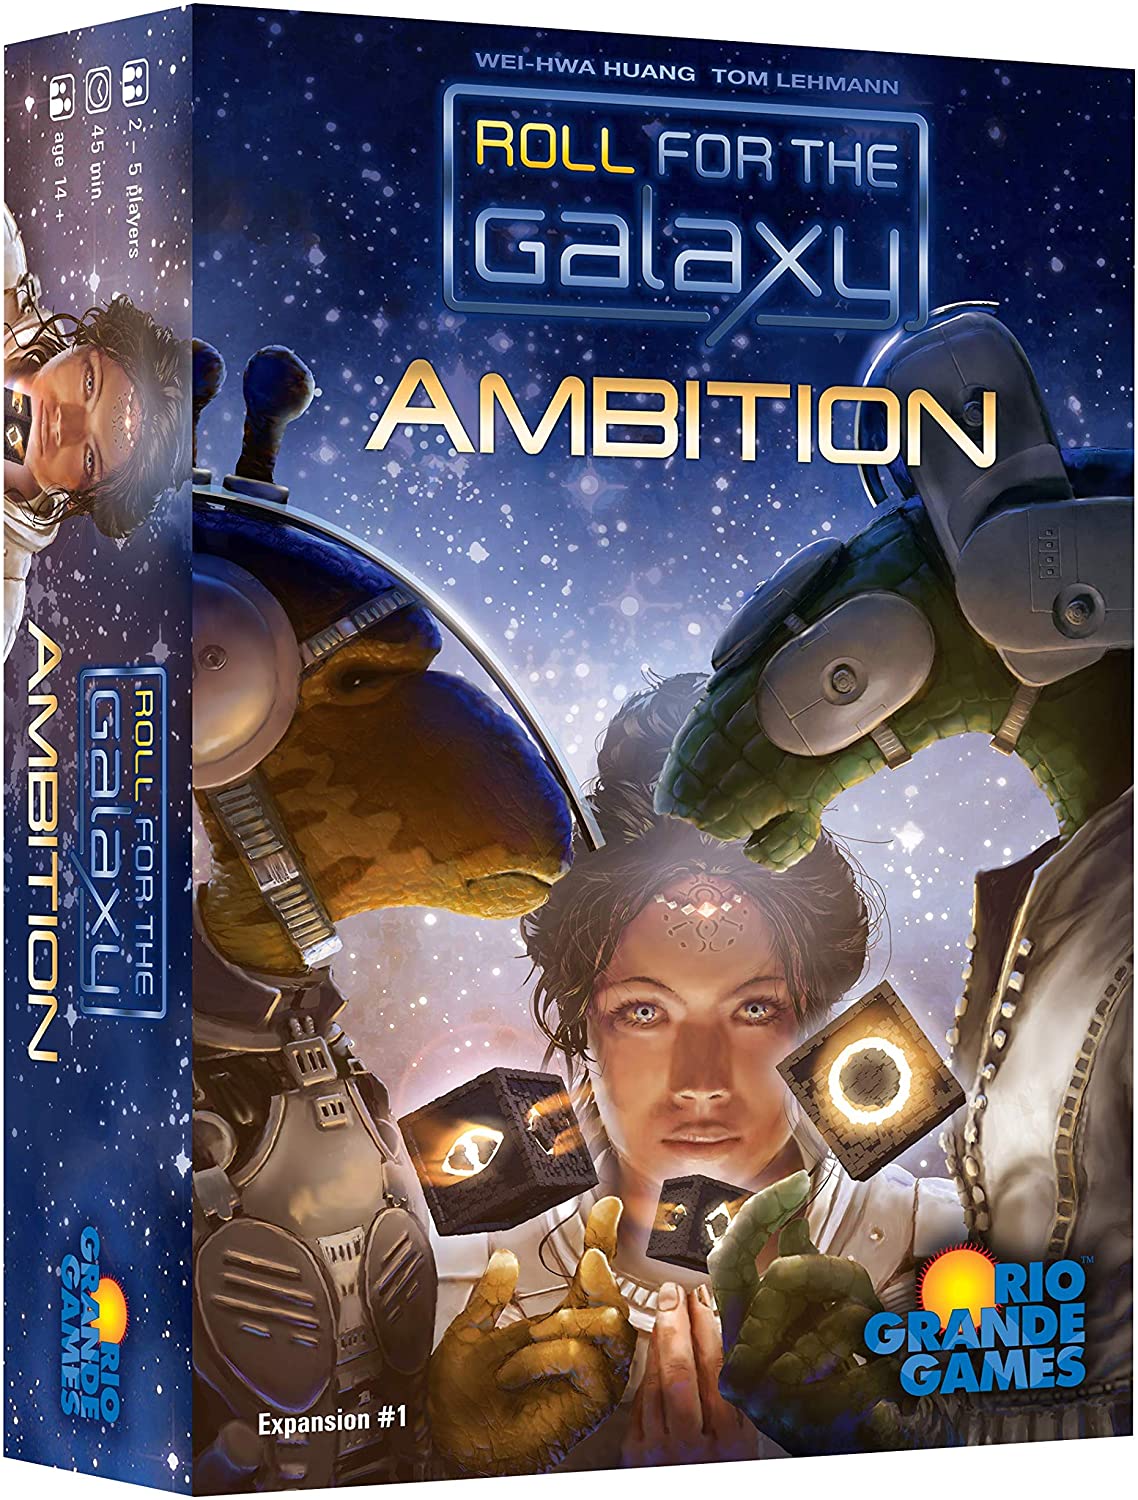 Roll for the Galaxy - Ambition